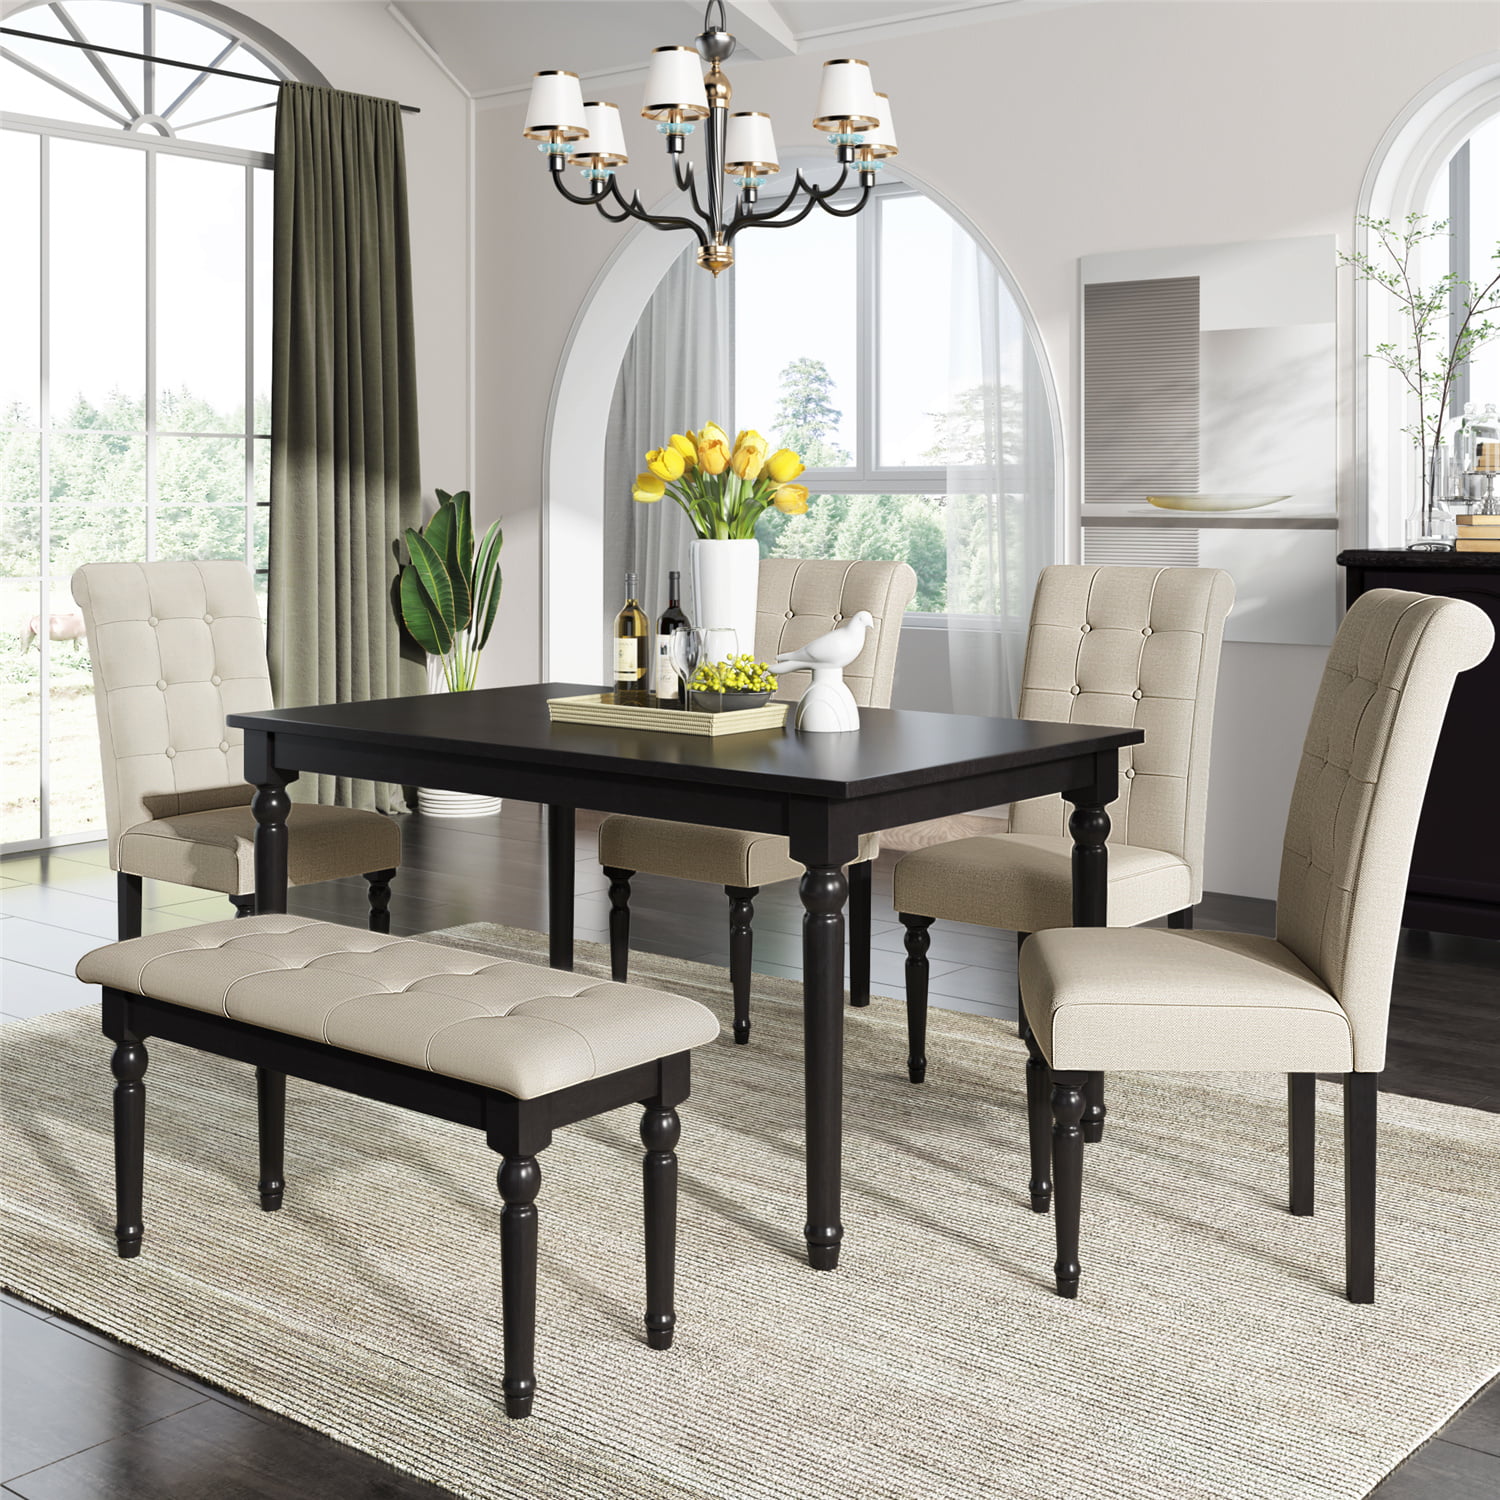 6 Piece Dining Table Set With Tufted, Dining Room Table Upholstered Chairs